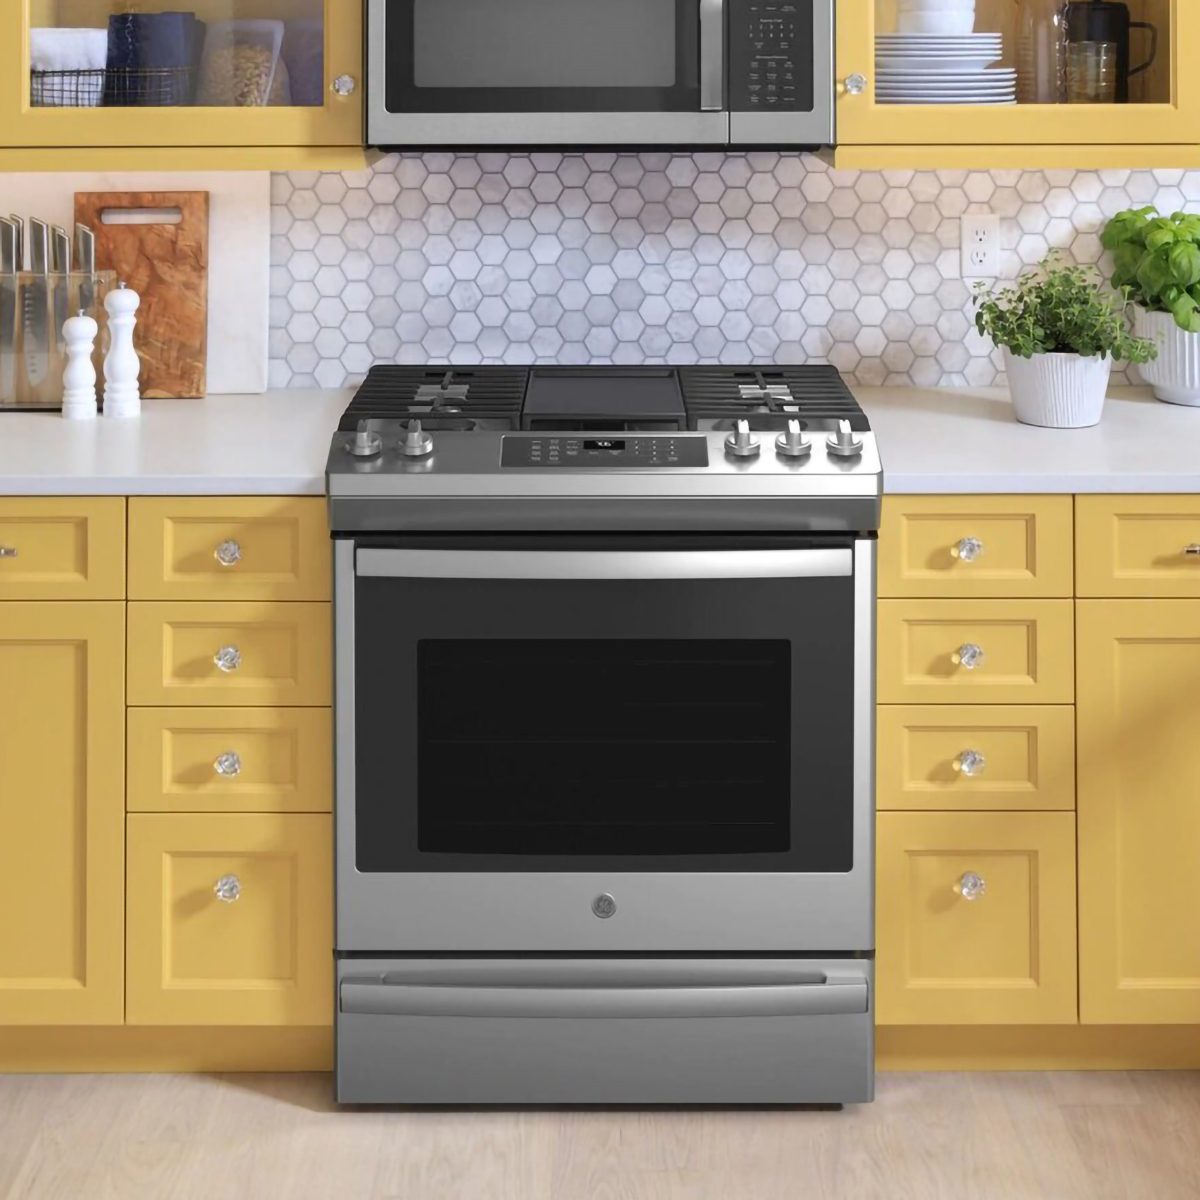 Presidents Day Appliance Sales Save Up to 48